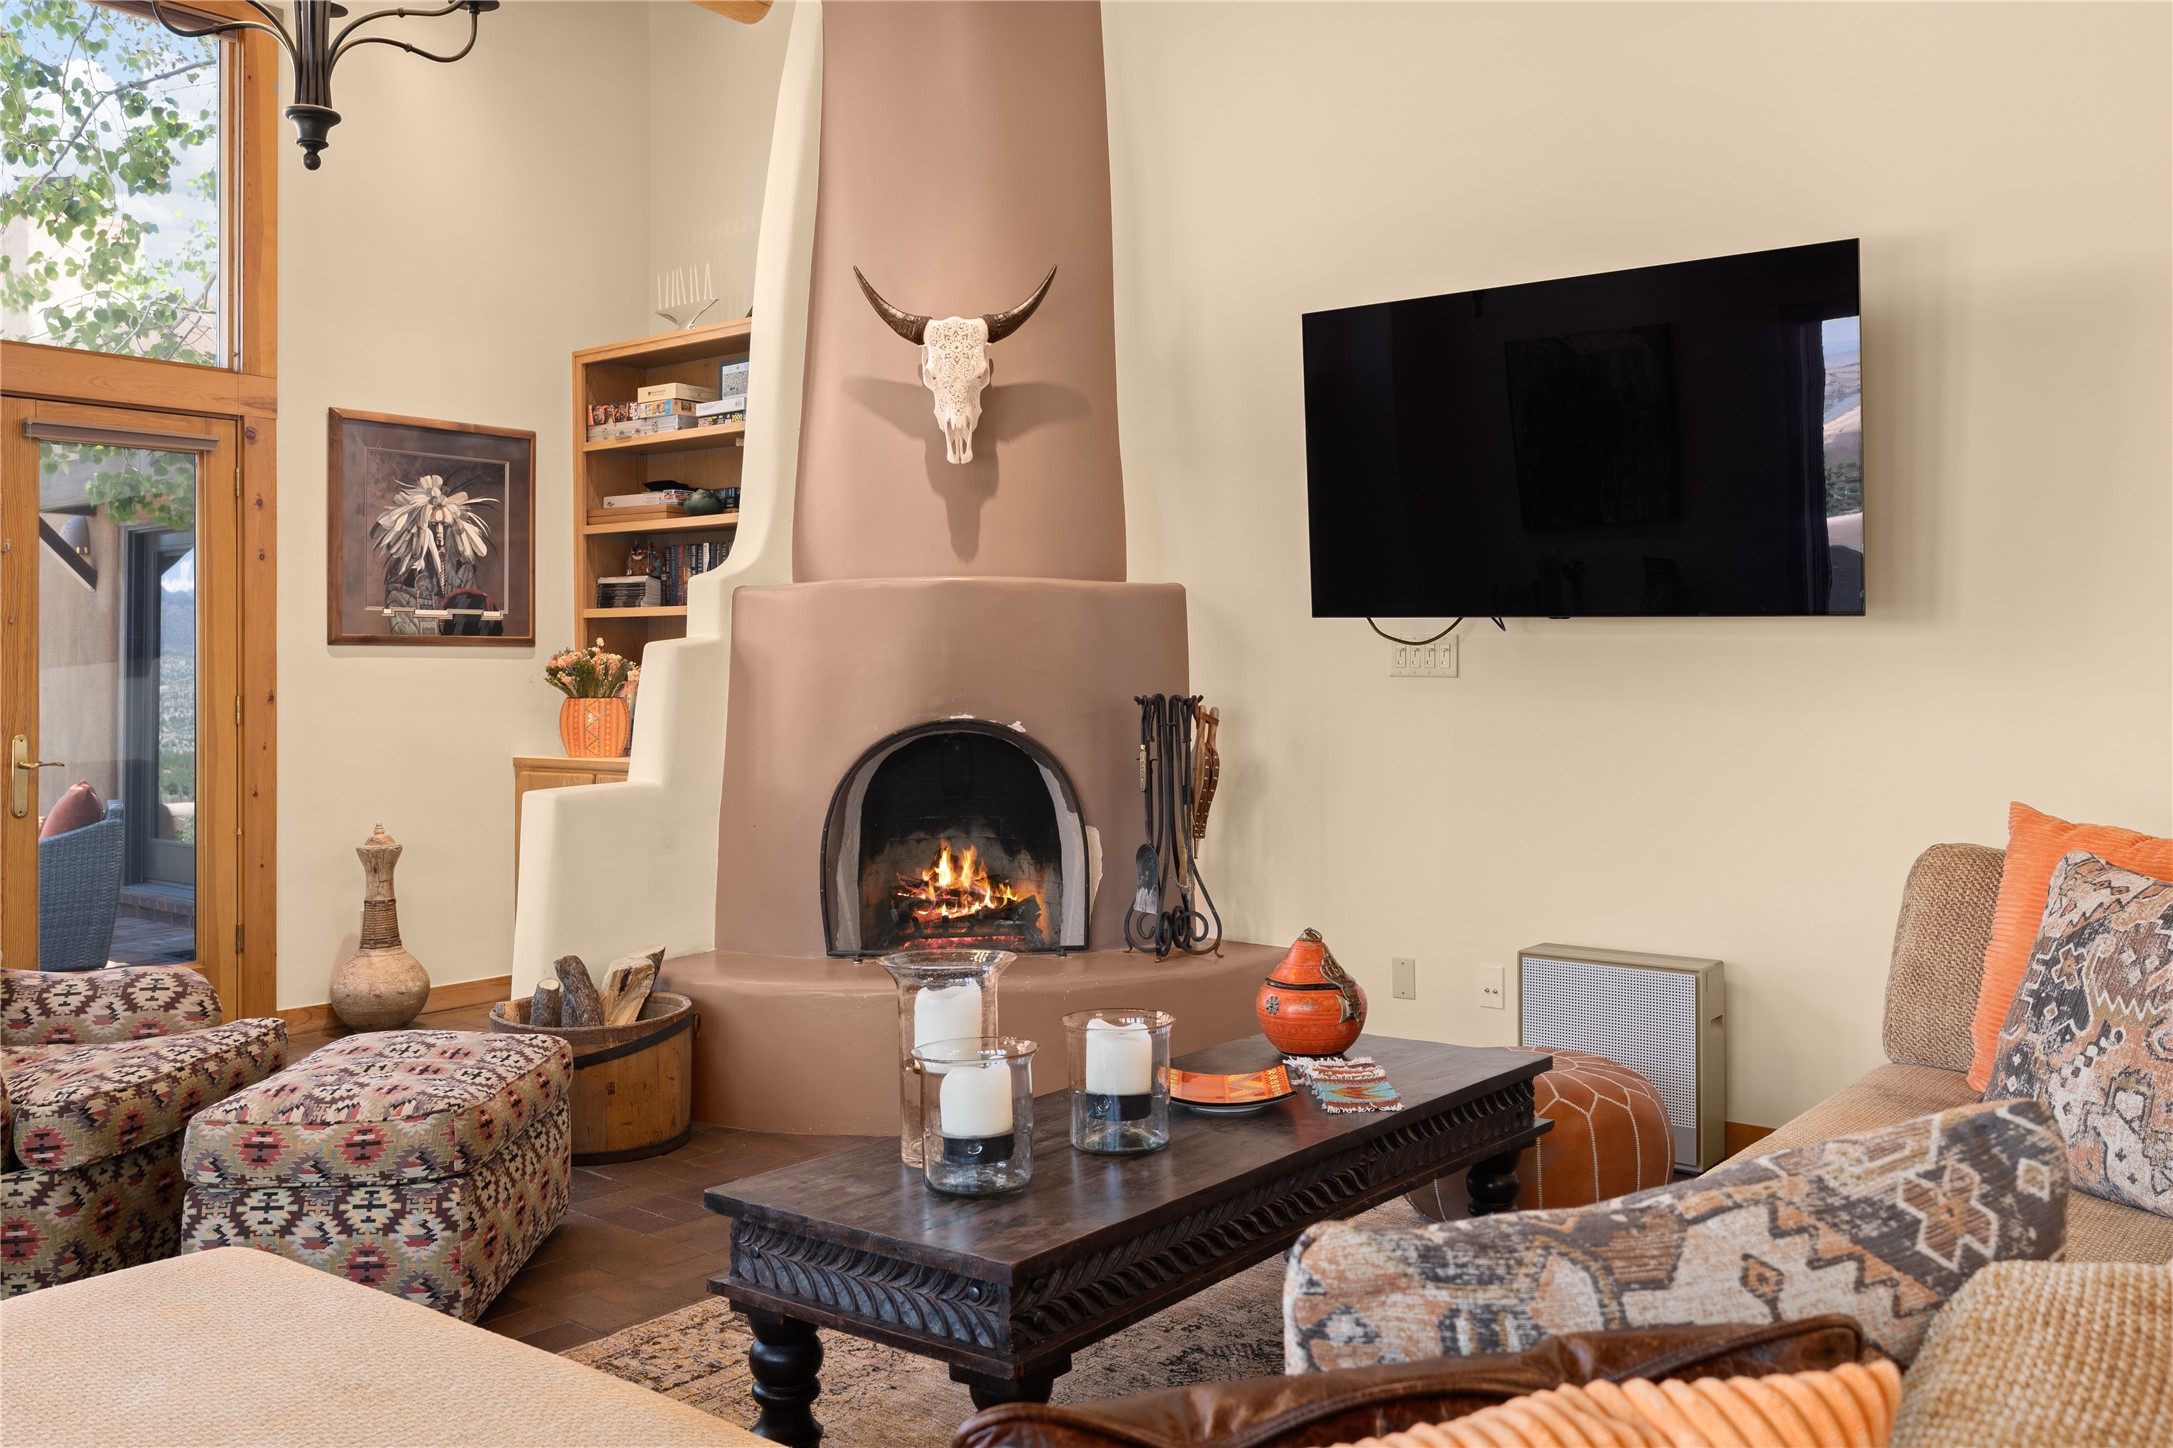 Cozy up next to the kiva fireplace with good company.